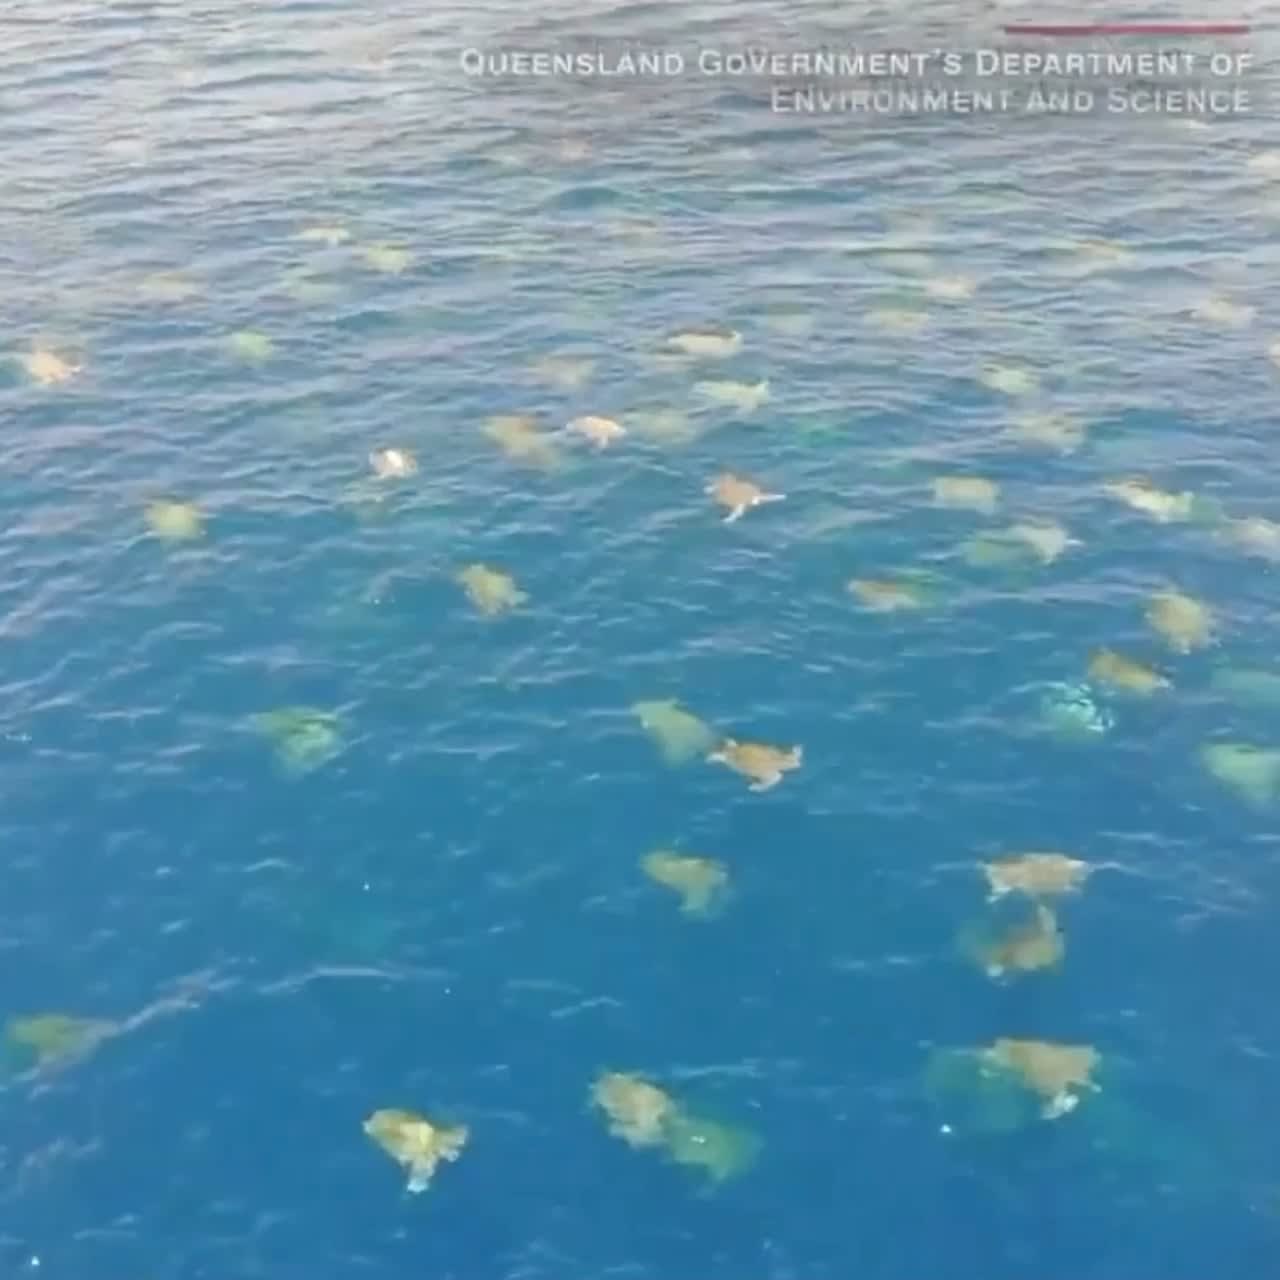 drone footage shows the largest remaining breeding ground for green turtles in the world. there are up to 64,000 turtles swimming around australia's great barrier reef during nesting season